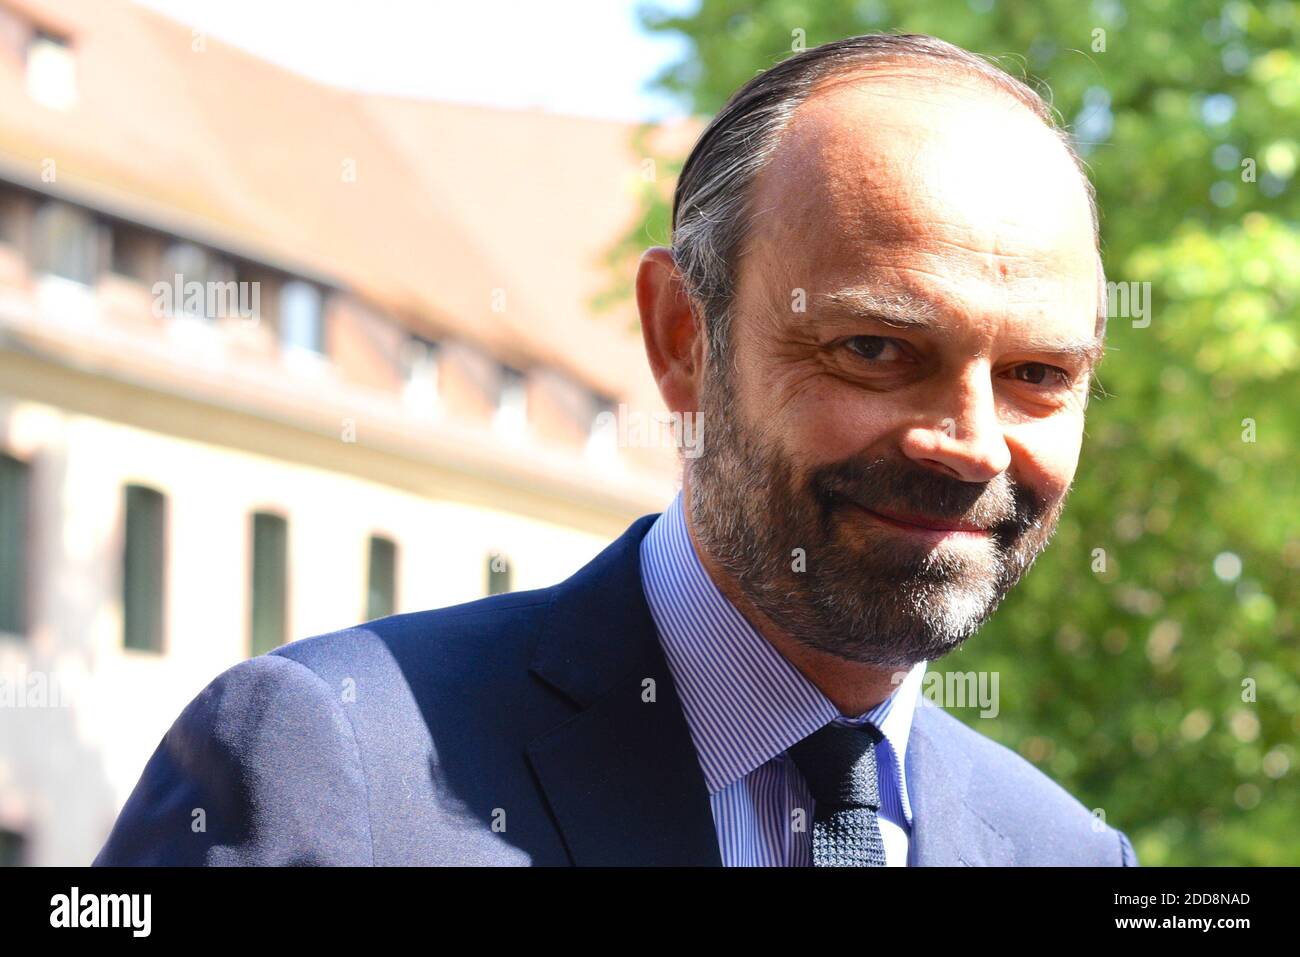 Prime Minister of Governement in France, Edouard Philippe, visits ENA, National School Of National Administration in Strasbourg, France on may 18, 2018. He is welcomed by Mr Patrick Gérard, Director of ENA. Photo by Nicolas Roses/ABACAPRESS.COM Stock Photo